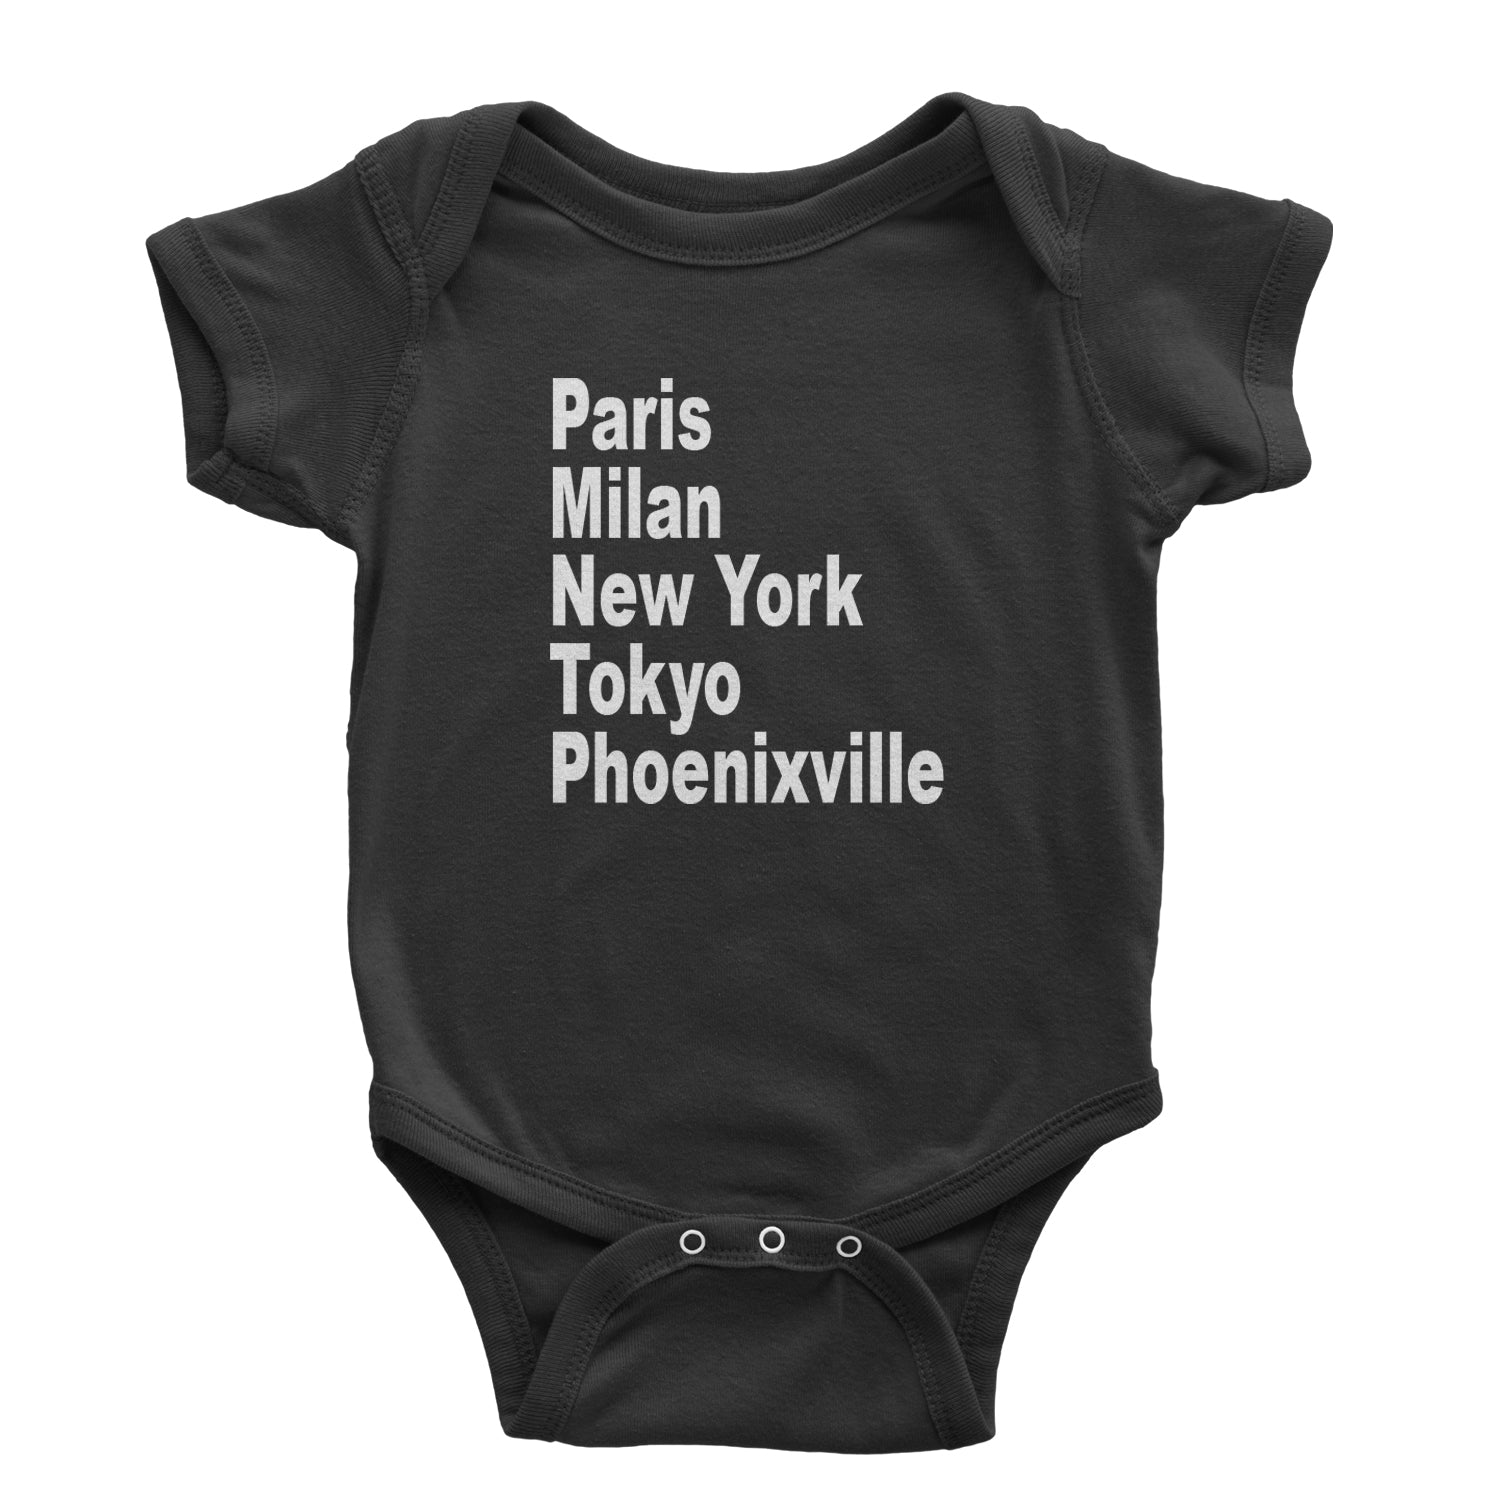 The Great Borough Of Phoenixville Infant One-Piece Romper Bodysuit and Toddler T-shirt